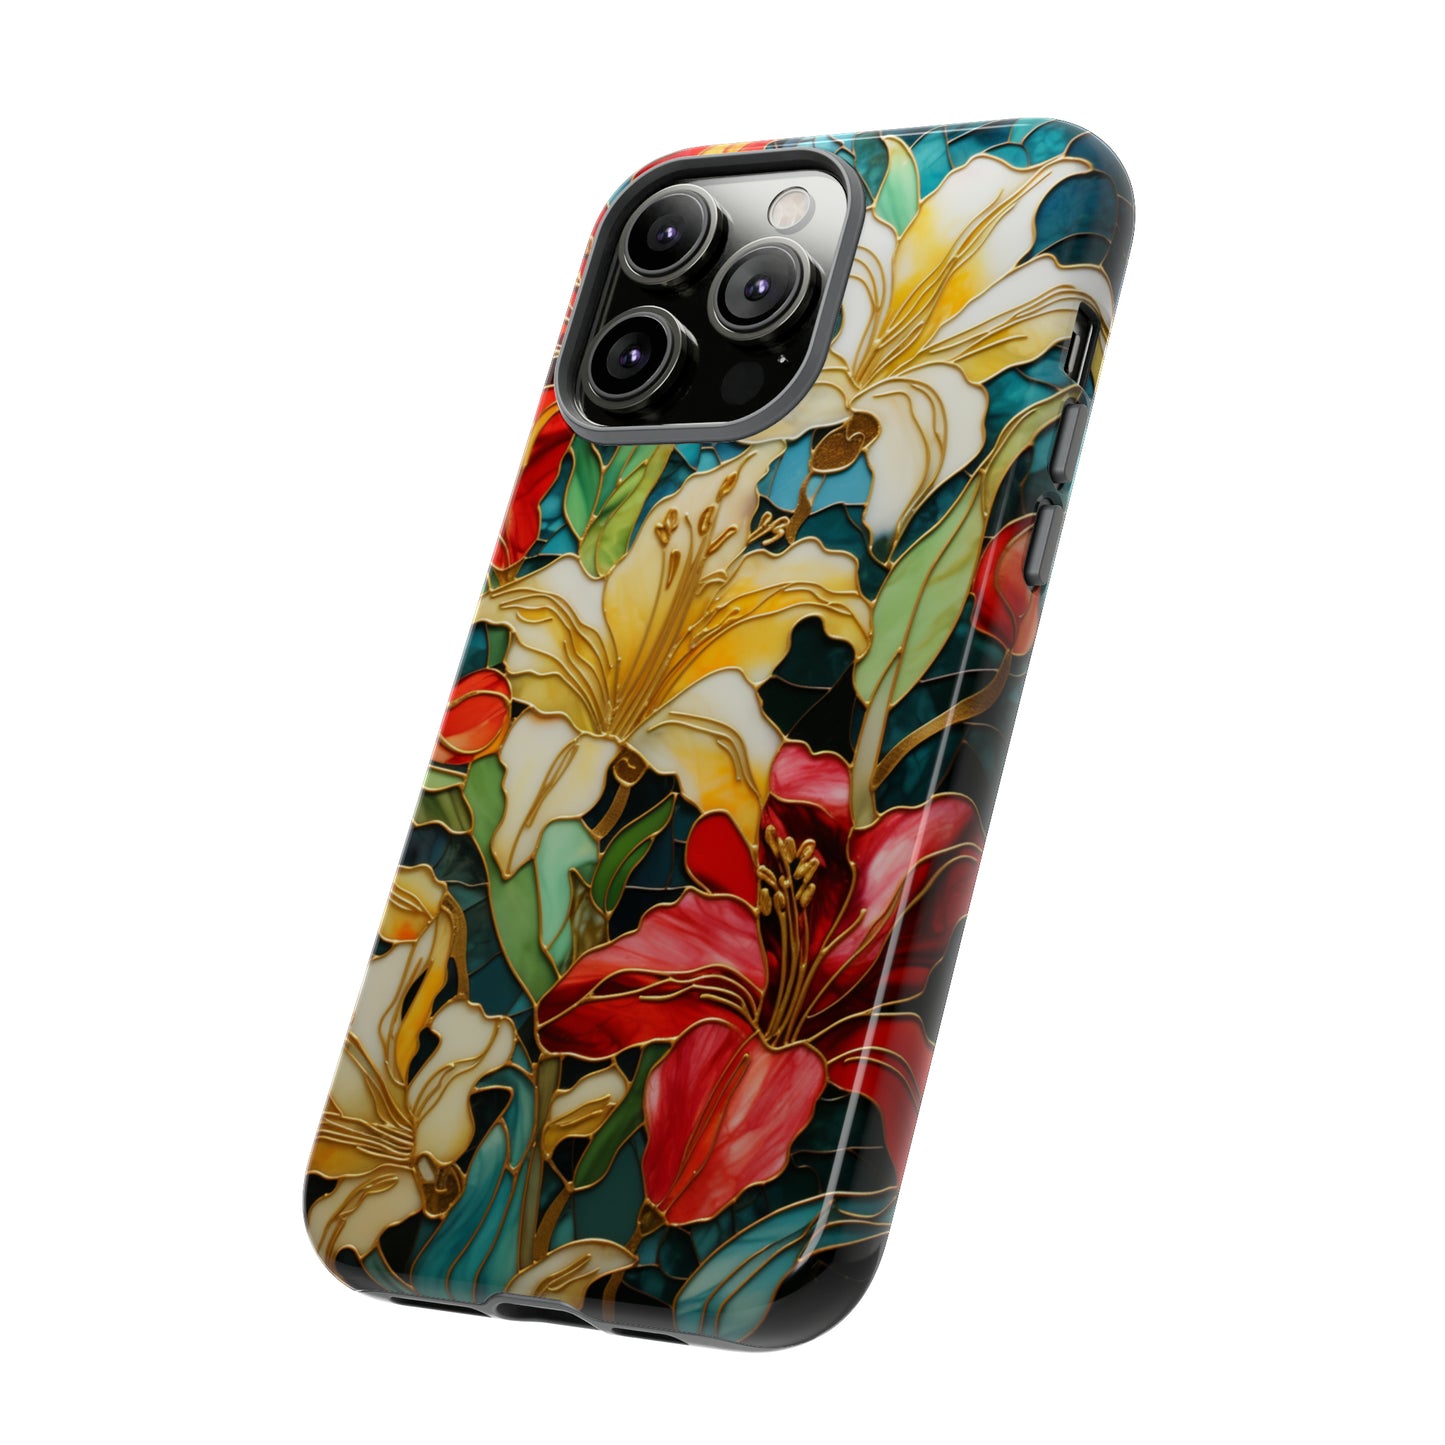 Lily Stained Glass Floral Gold Inlay